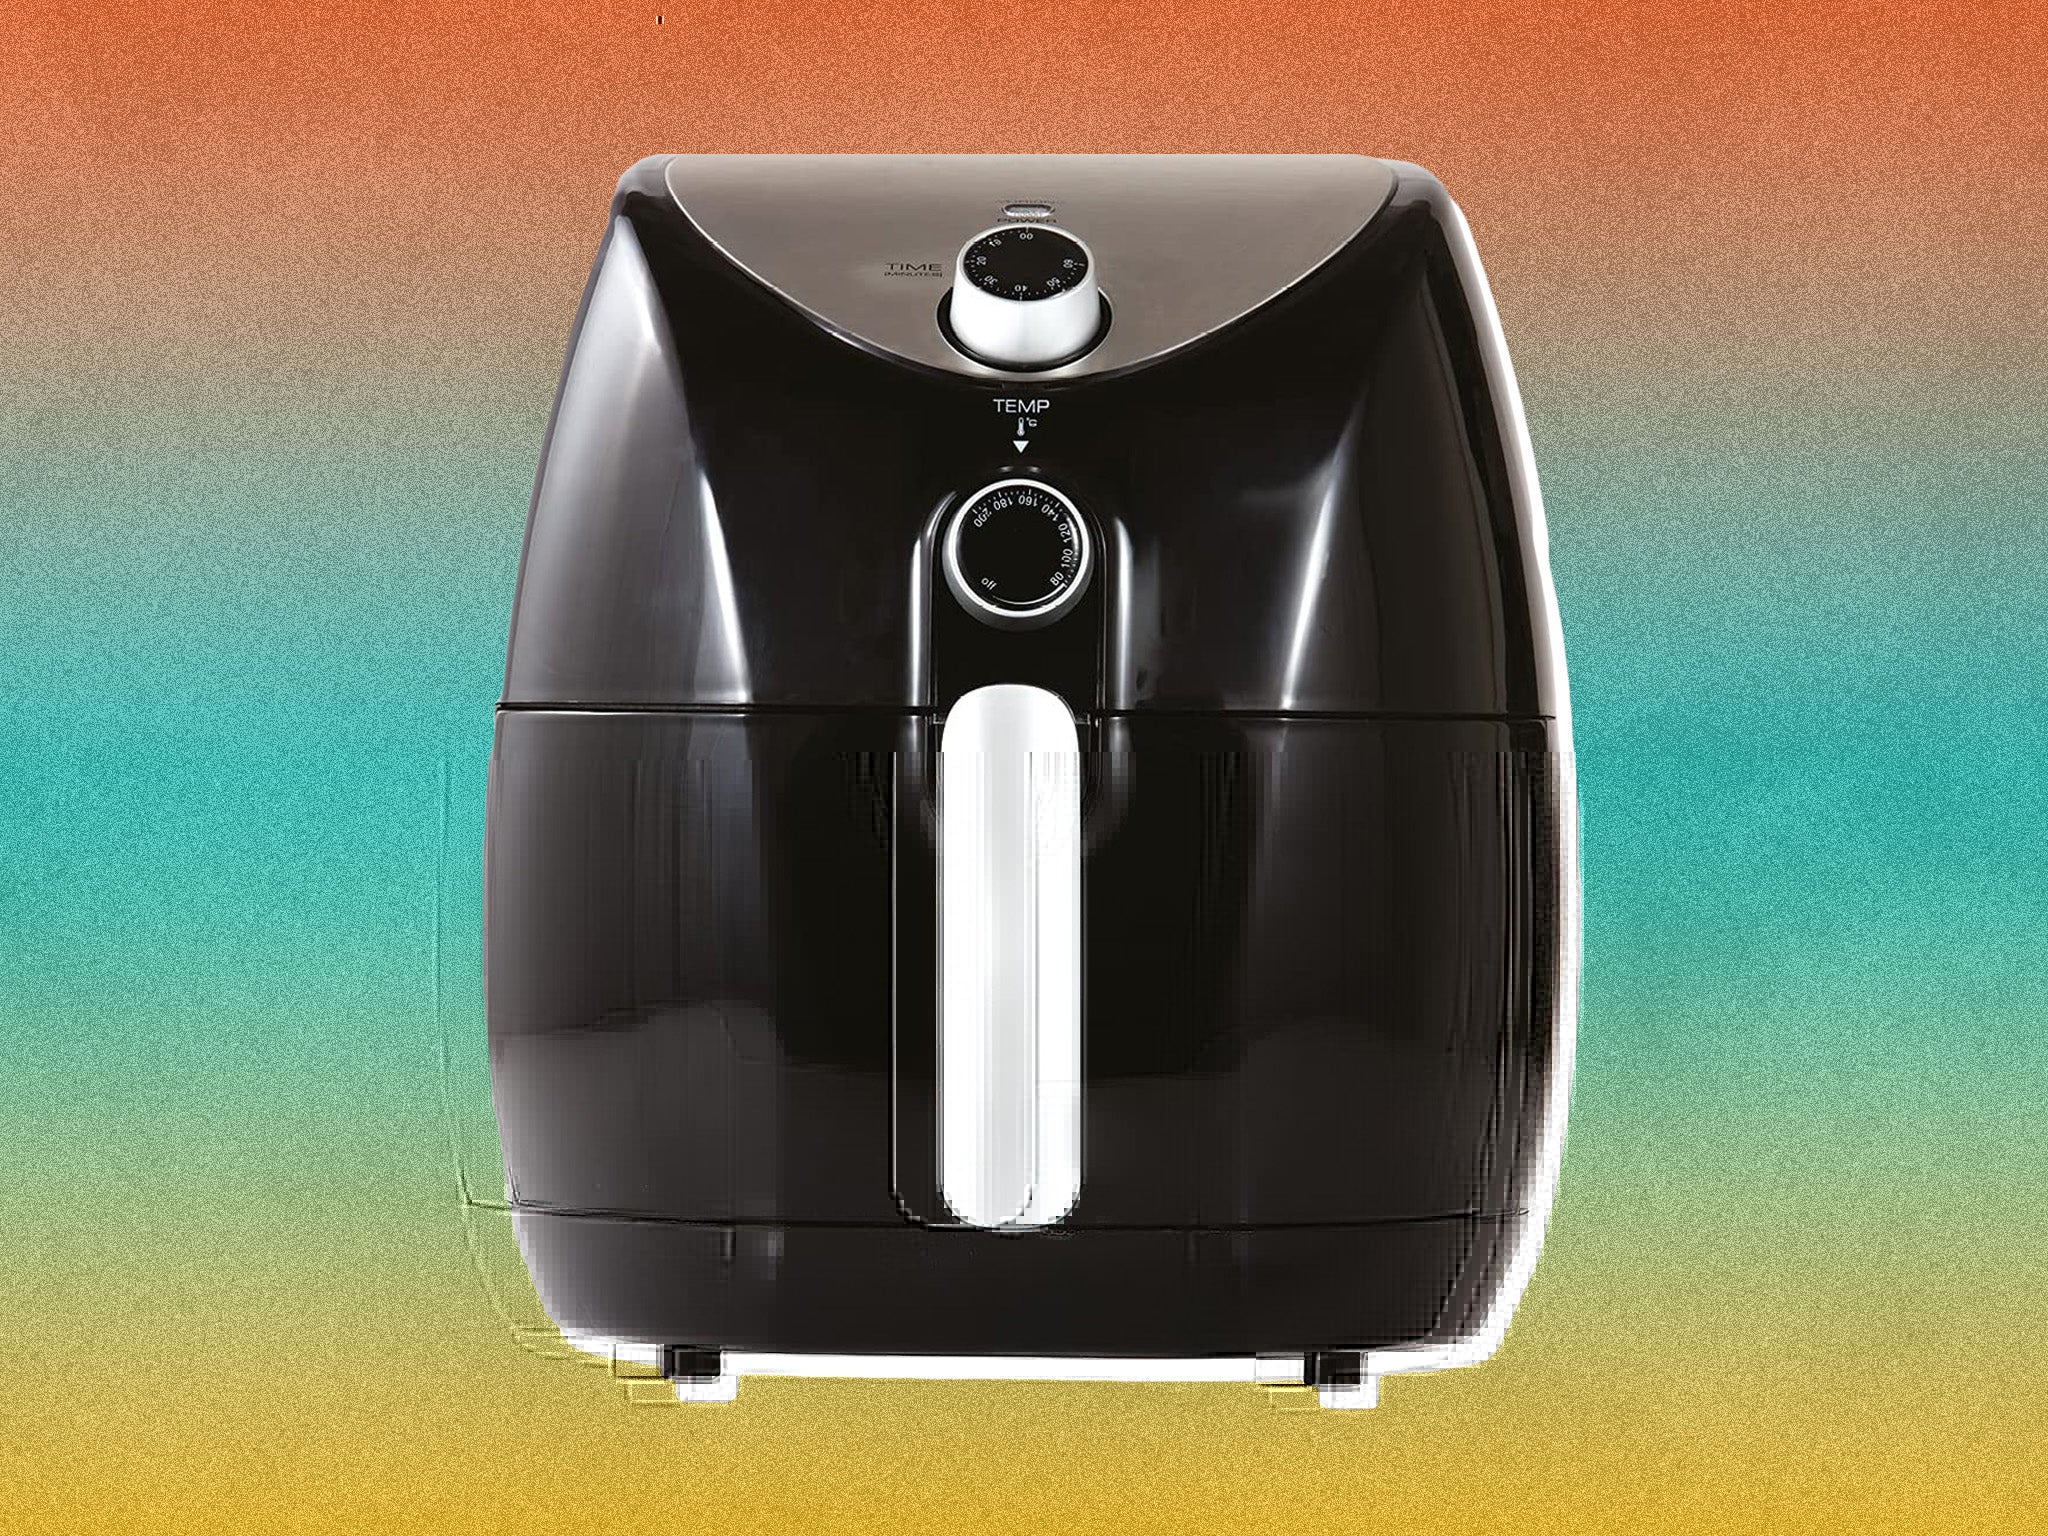 This Tefal air fryer is less than £50 in 's spring sale